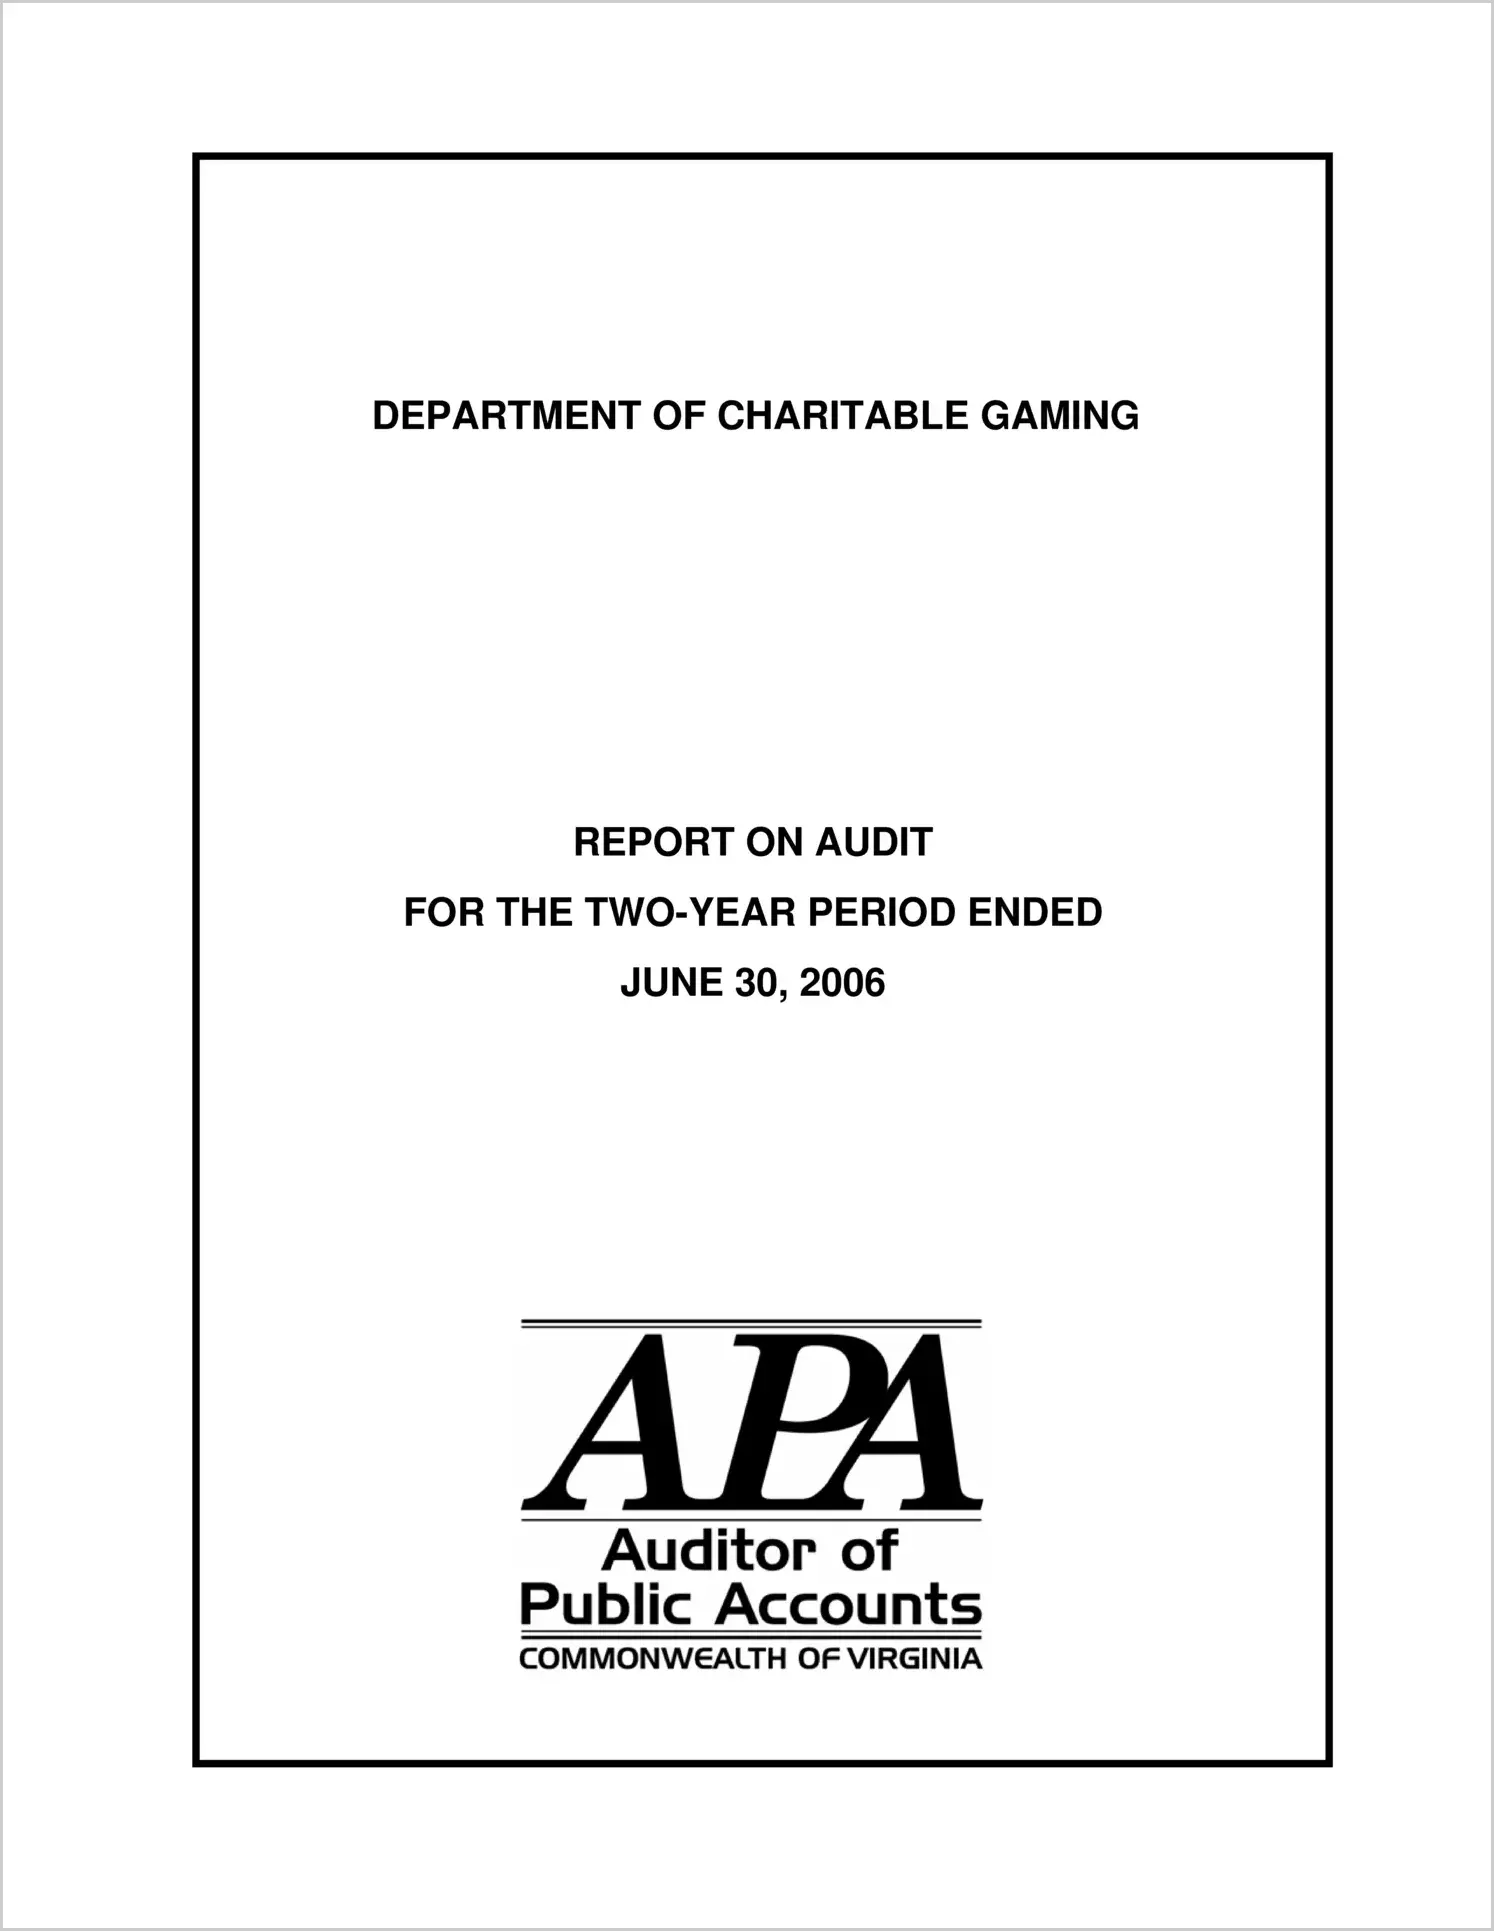 Department of Charitable Gaming Report on Audit For the Two-Year Period Ended June 30, 2006